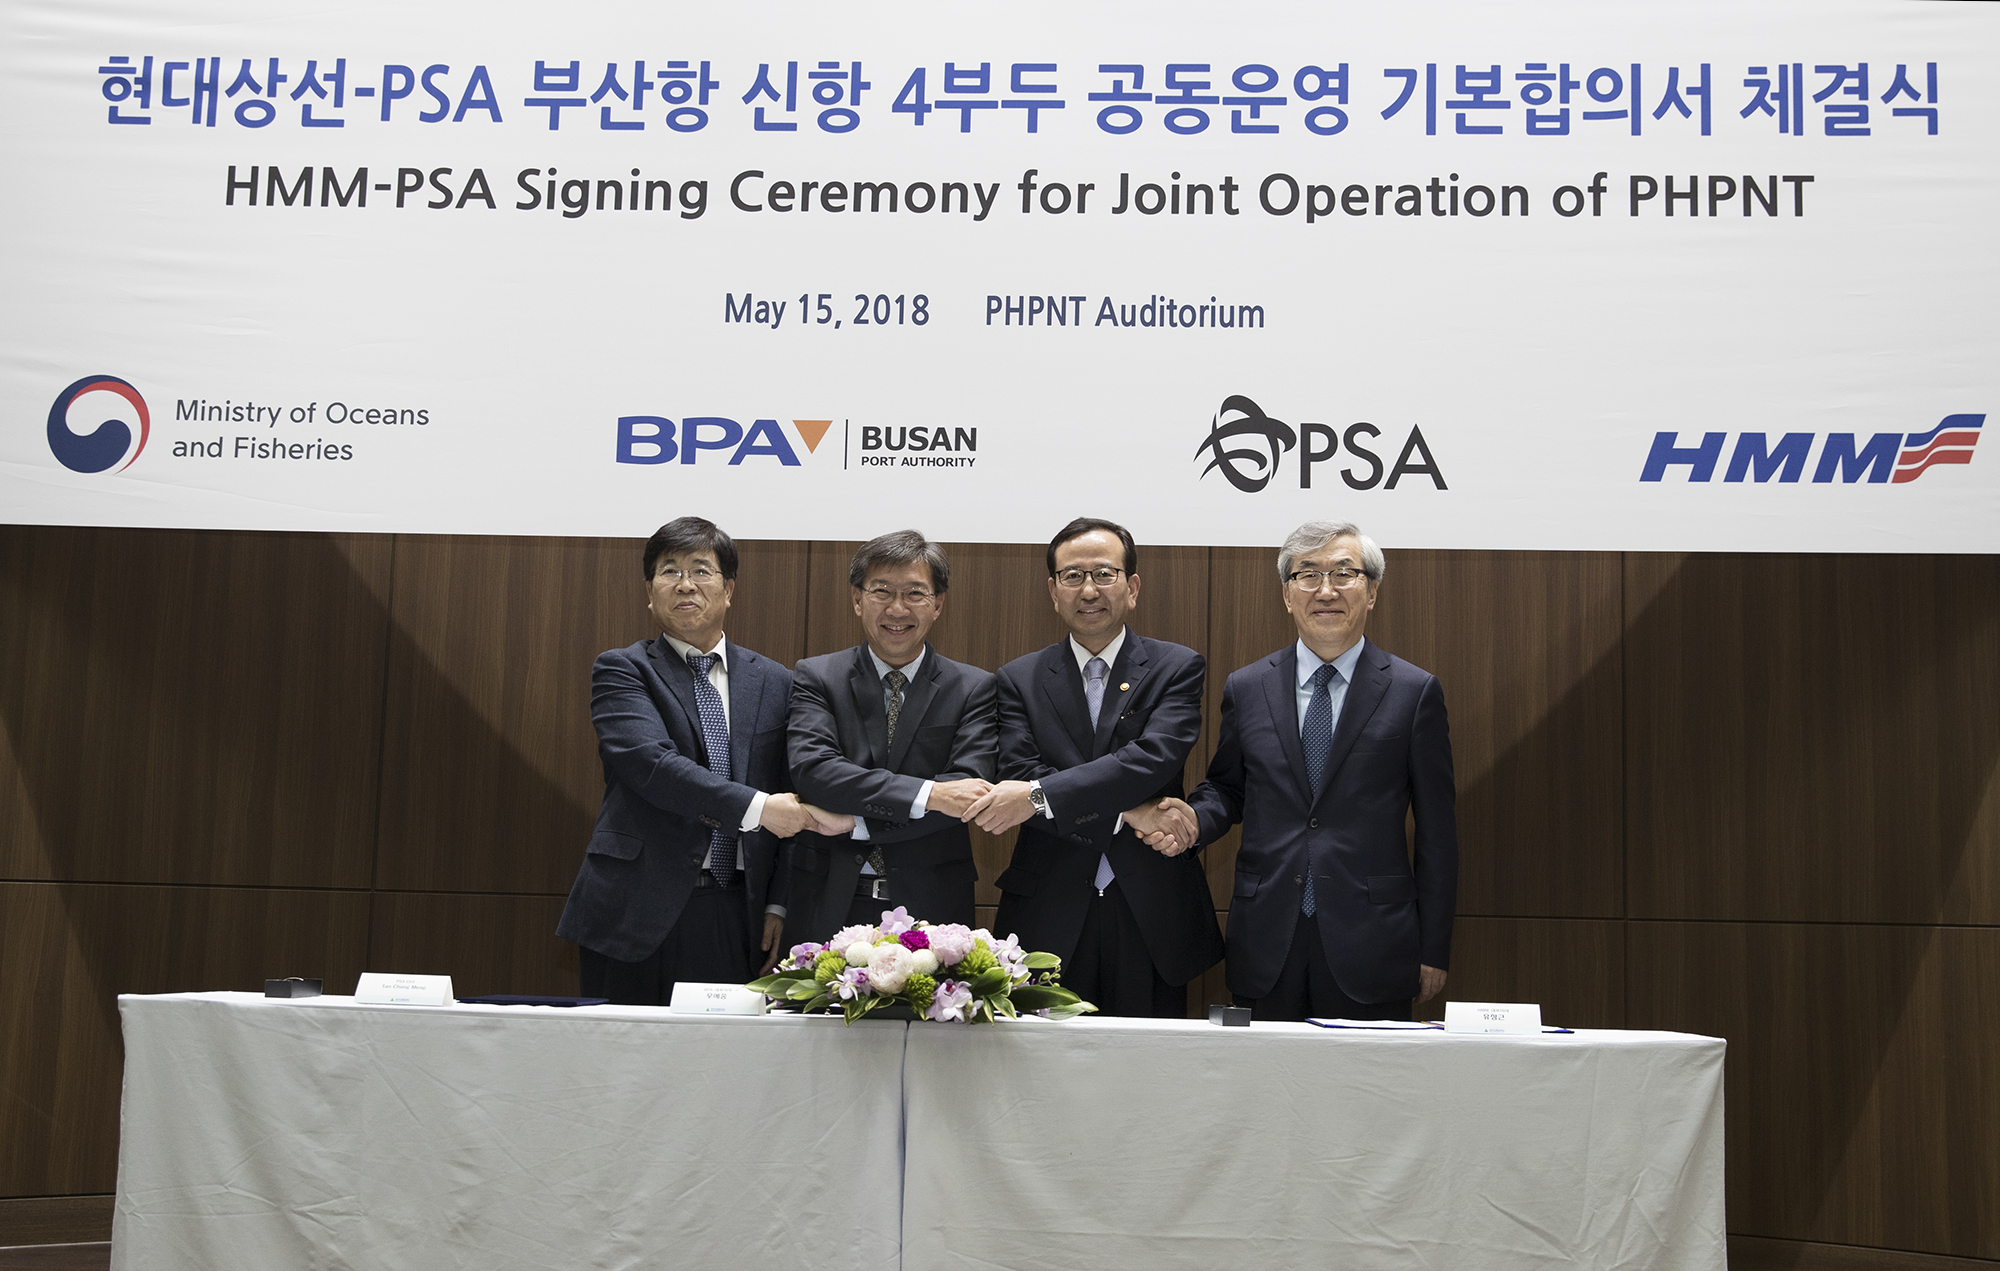 Contract signing ceremony